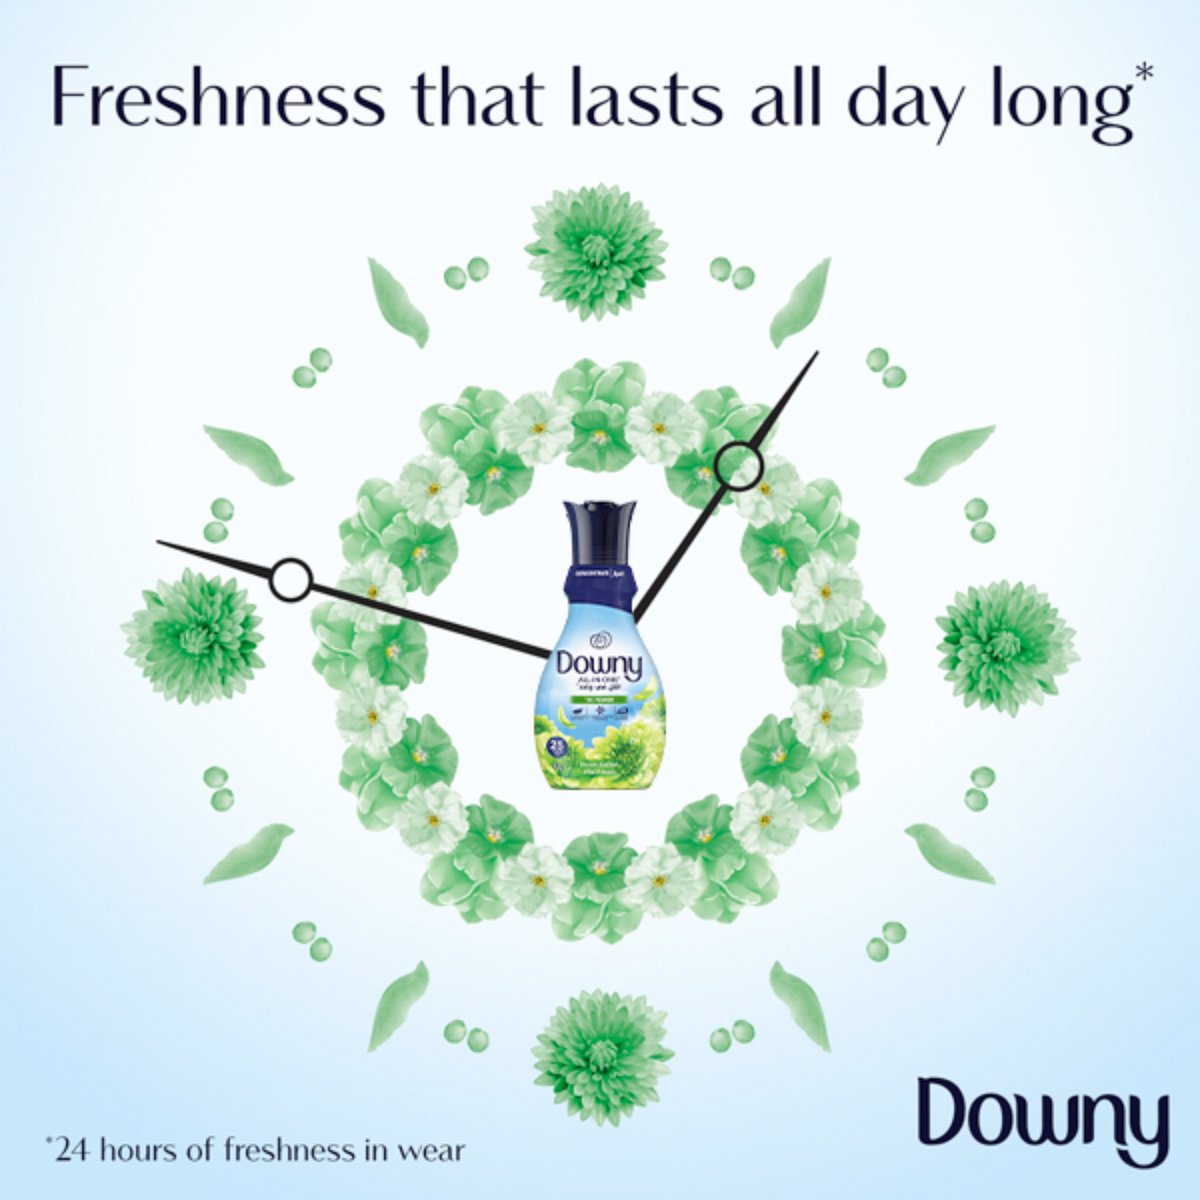 Downy Concentrate All-in-One Dream Garden Fabric Softener 1 Litre 